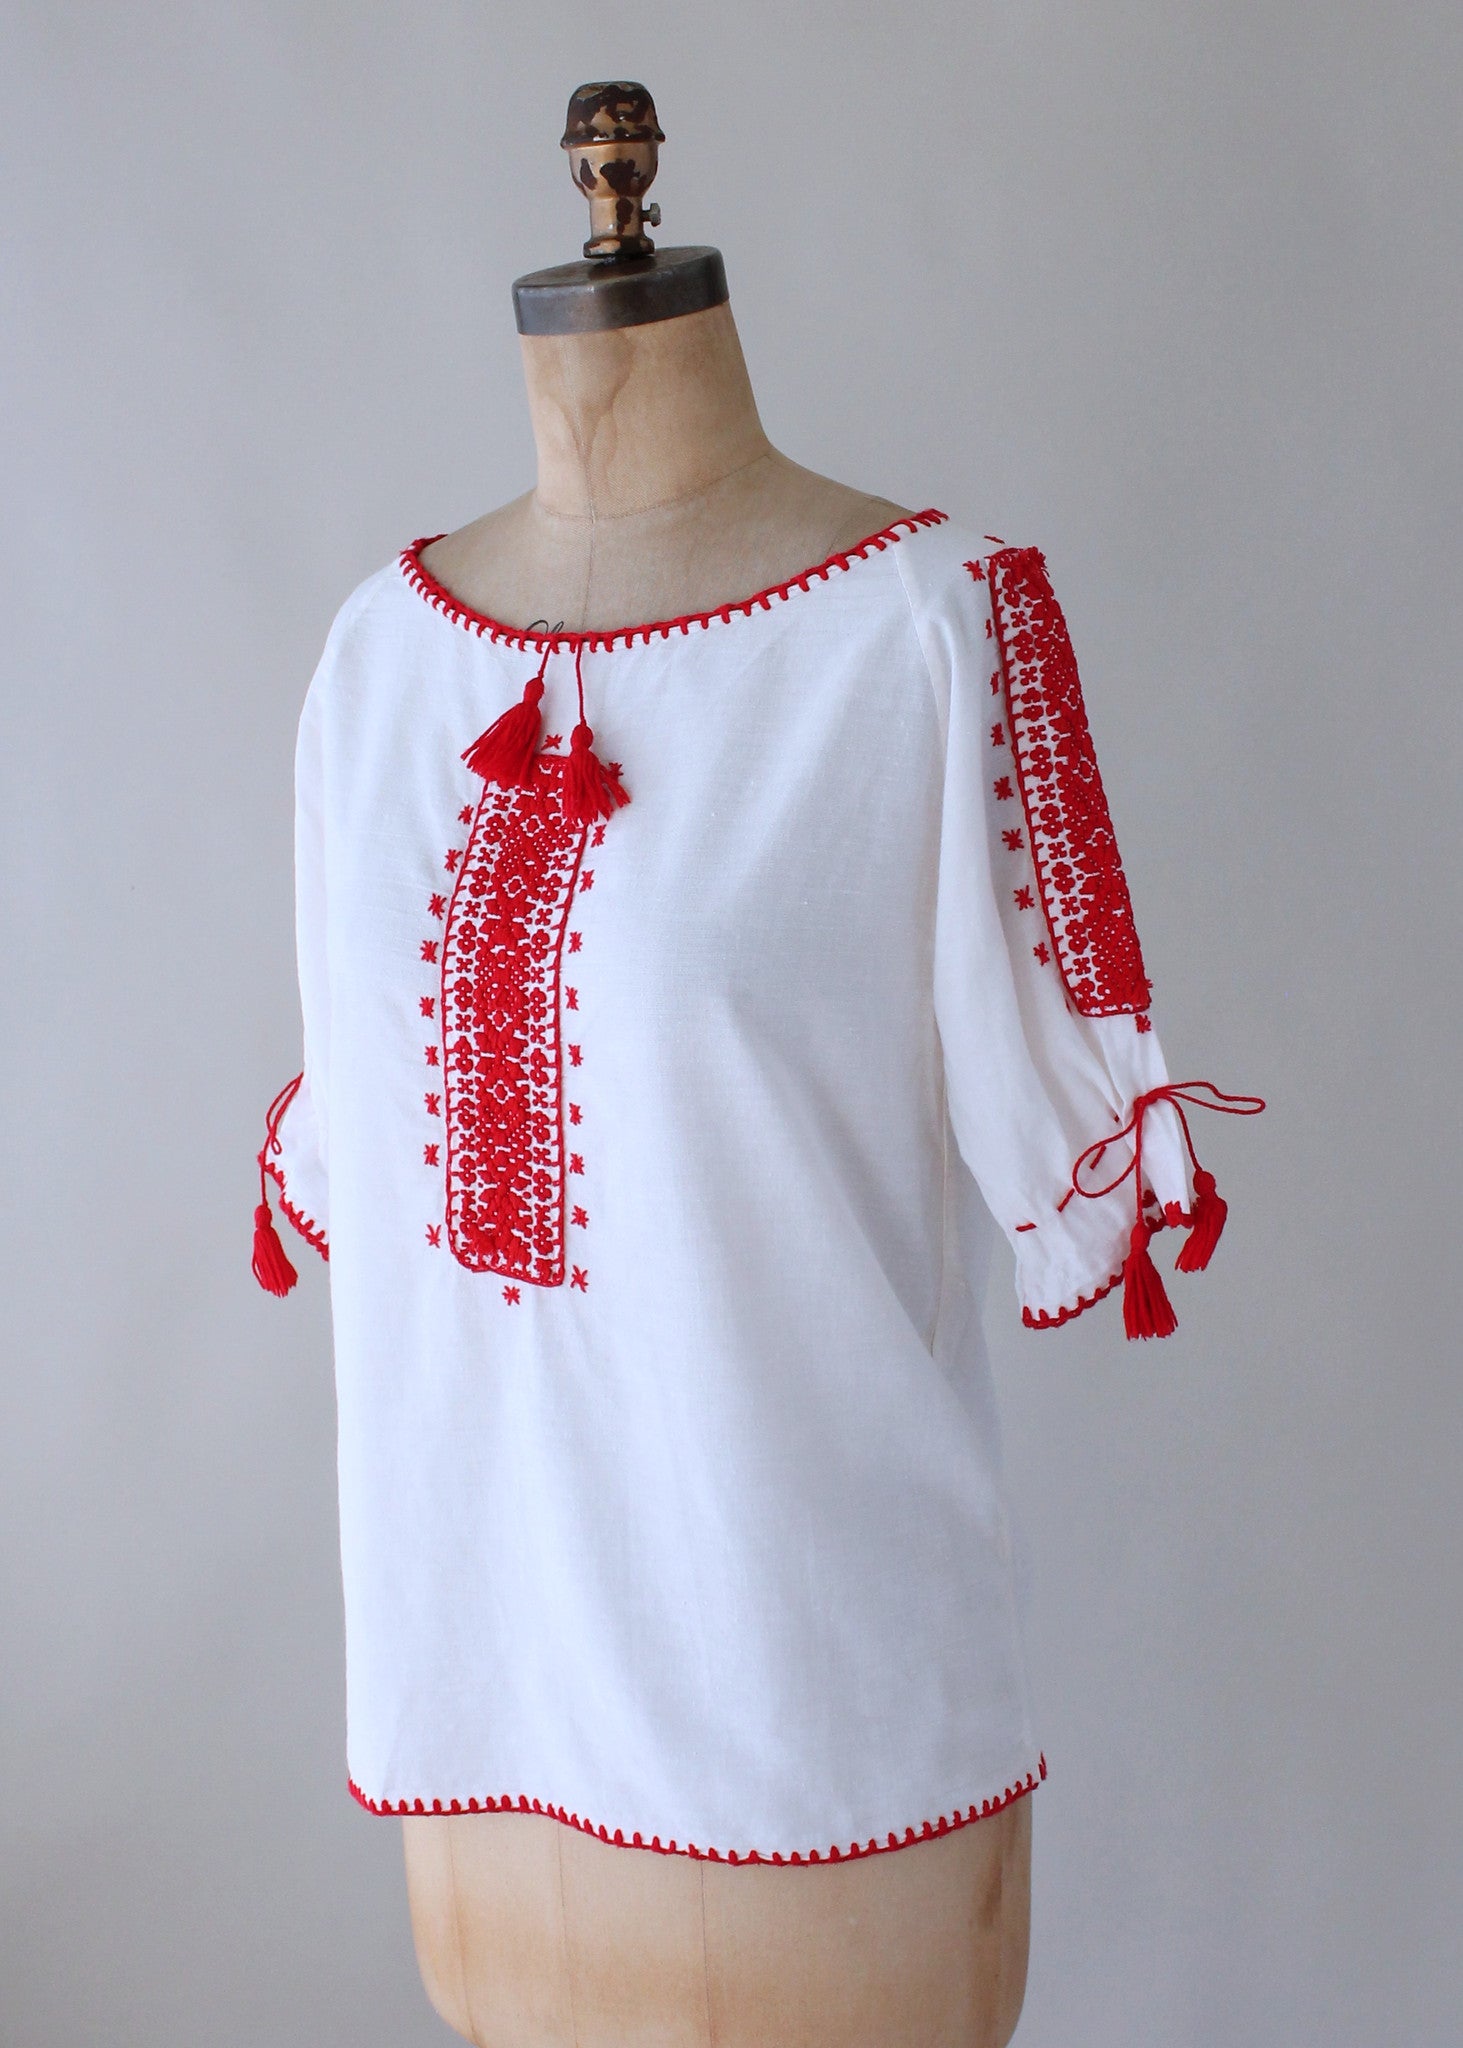 Vintage 1970s Red and White Embroidered Cotton Peasant Shirt - Raleigh ...